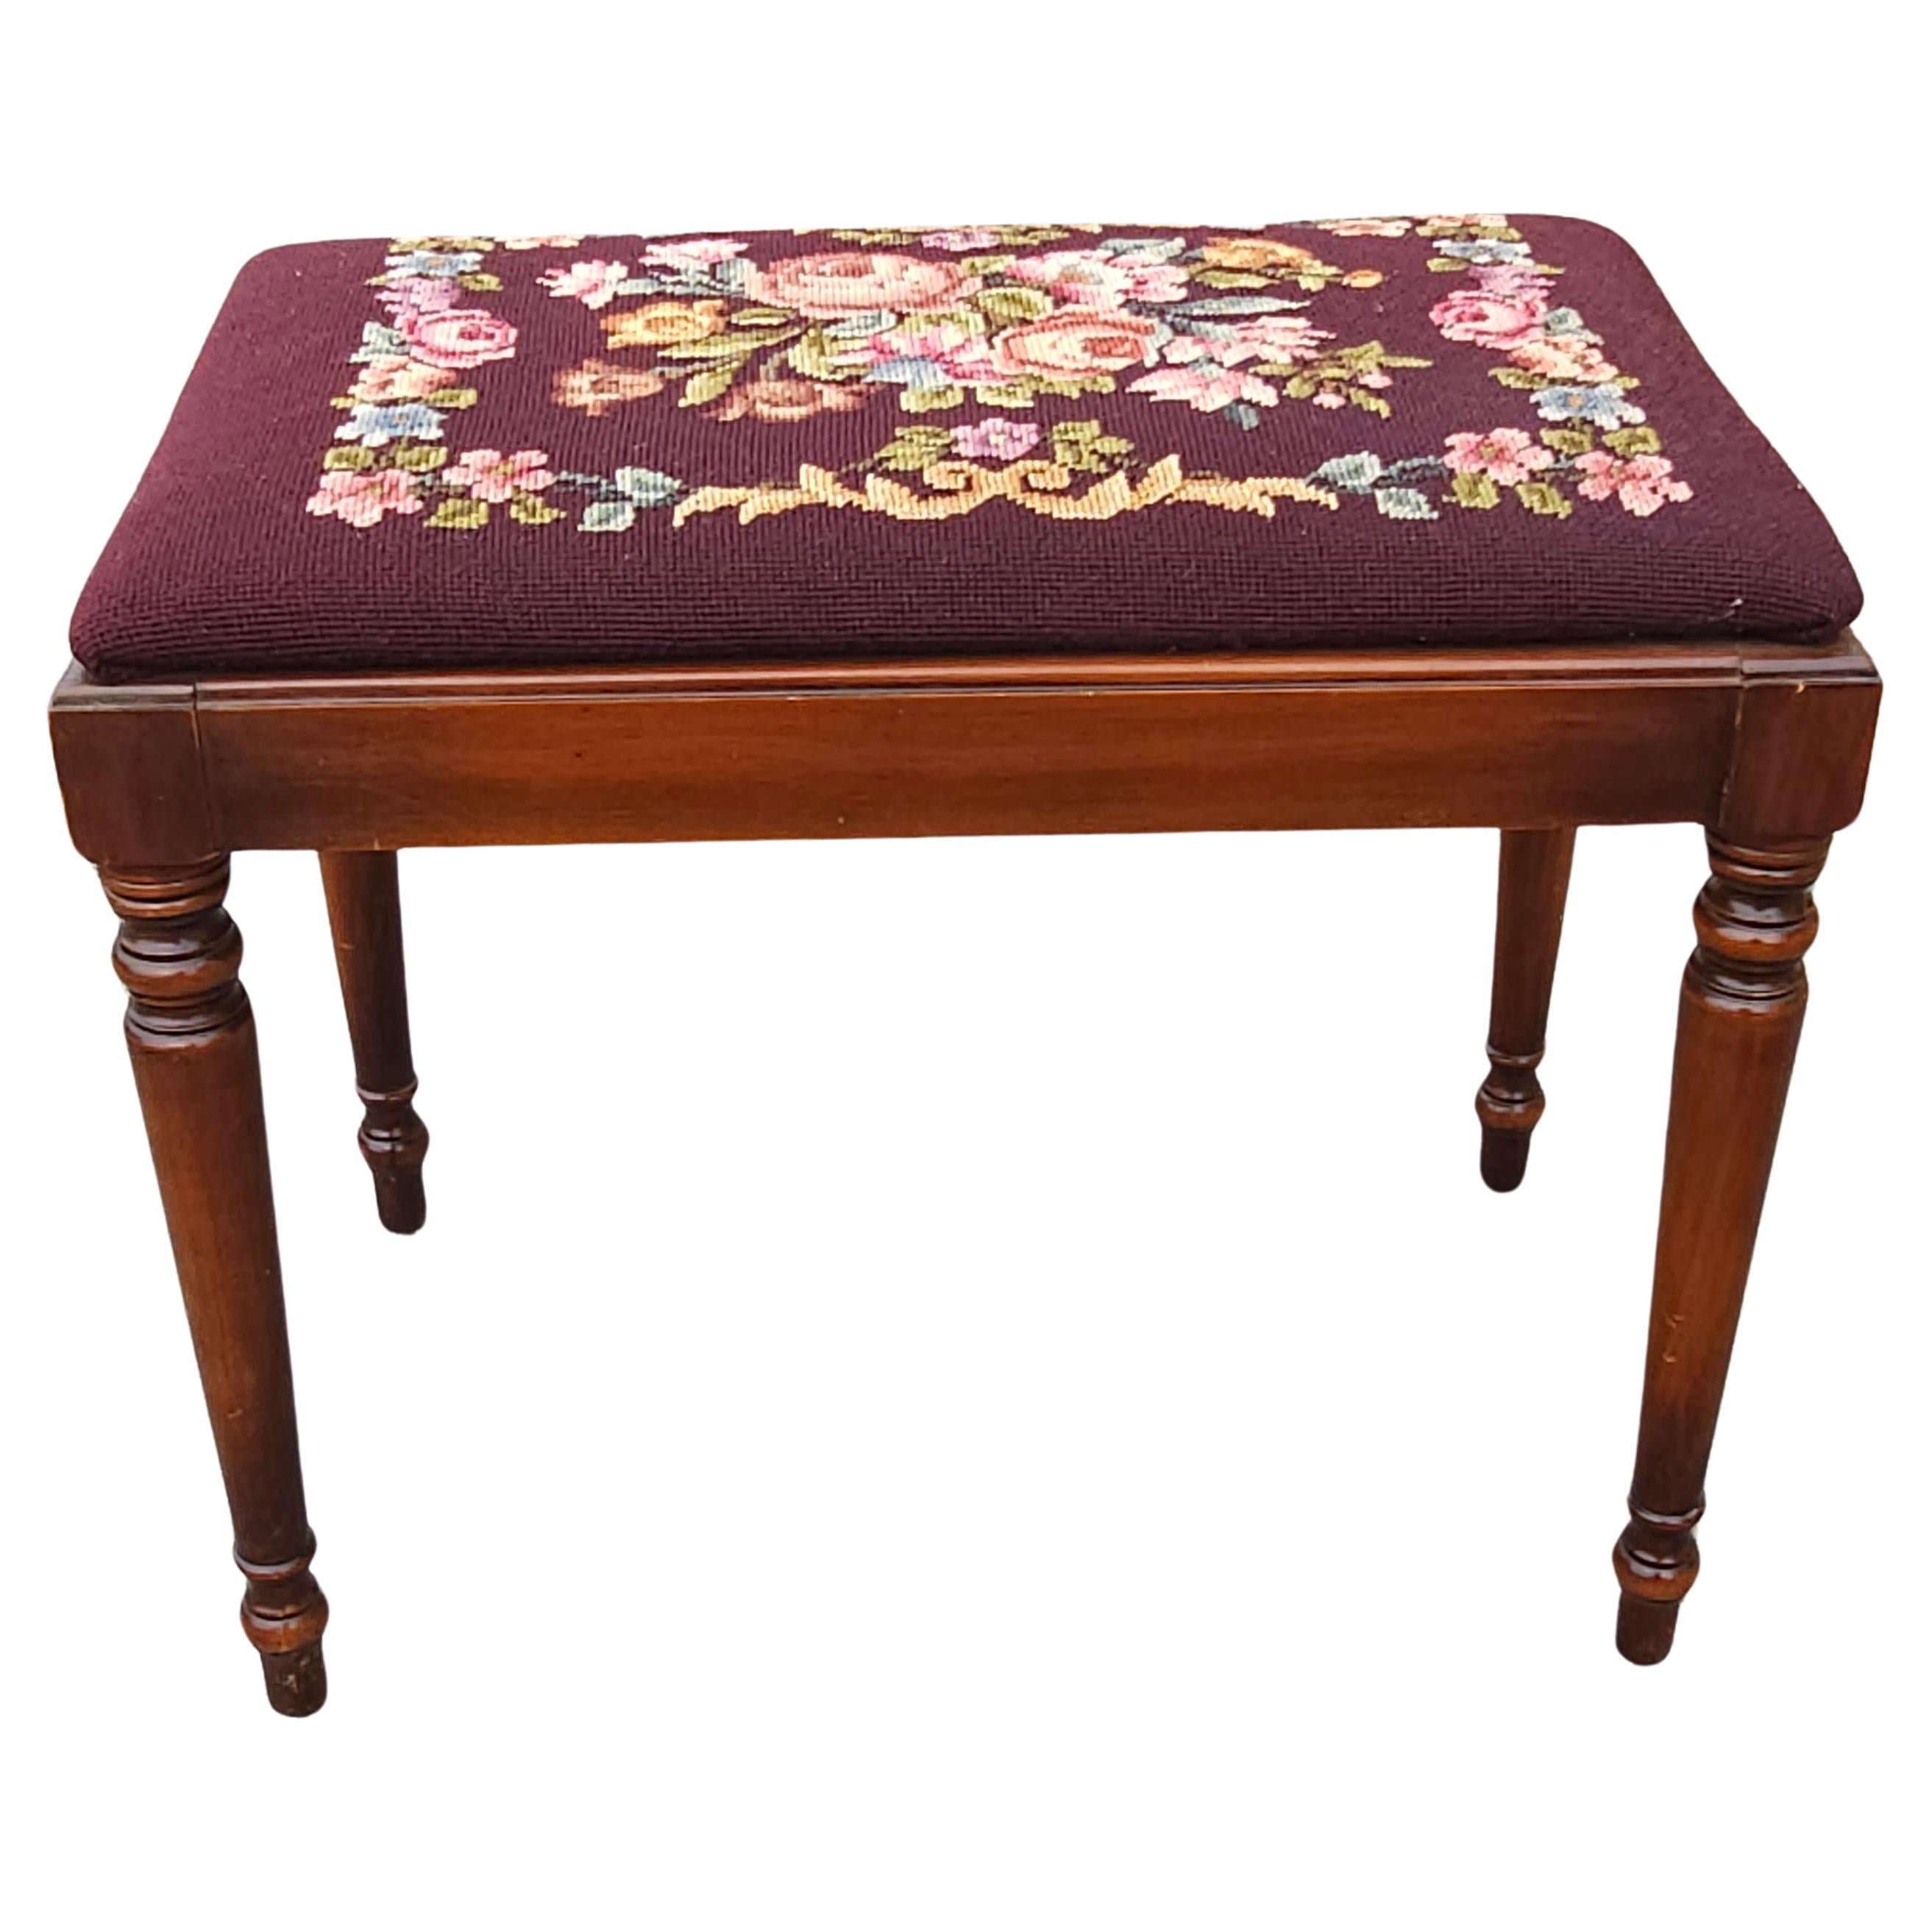 Mid 20th Century Kindel Furniture Oxford Cherry & Needlepoint Upholstered Bench